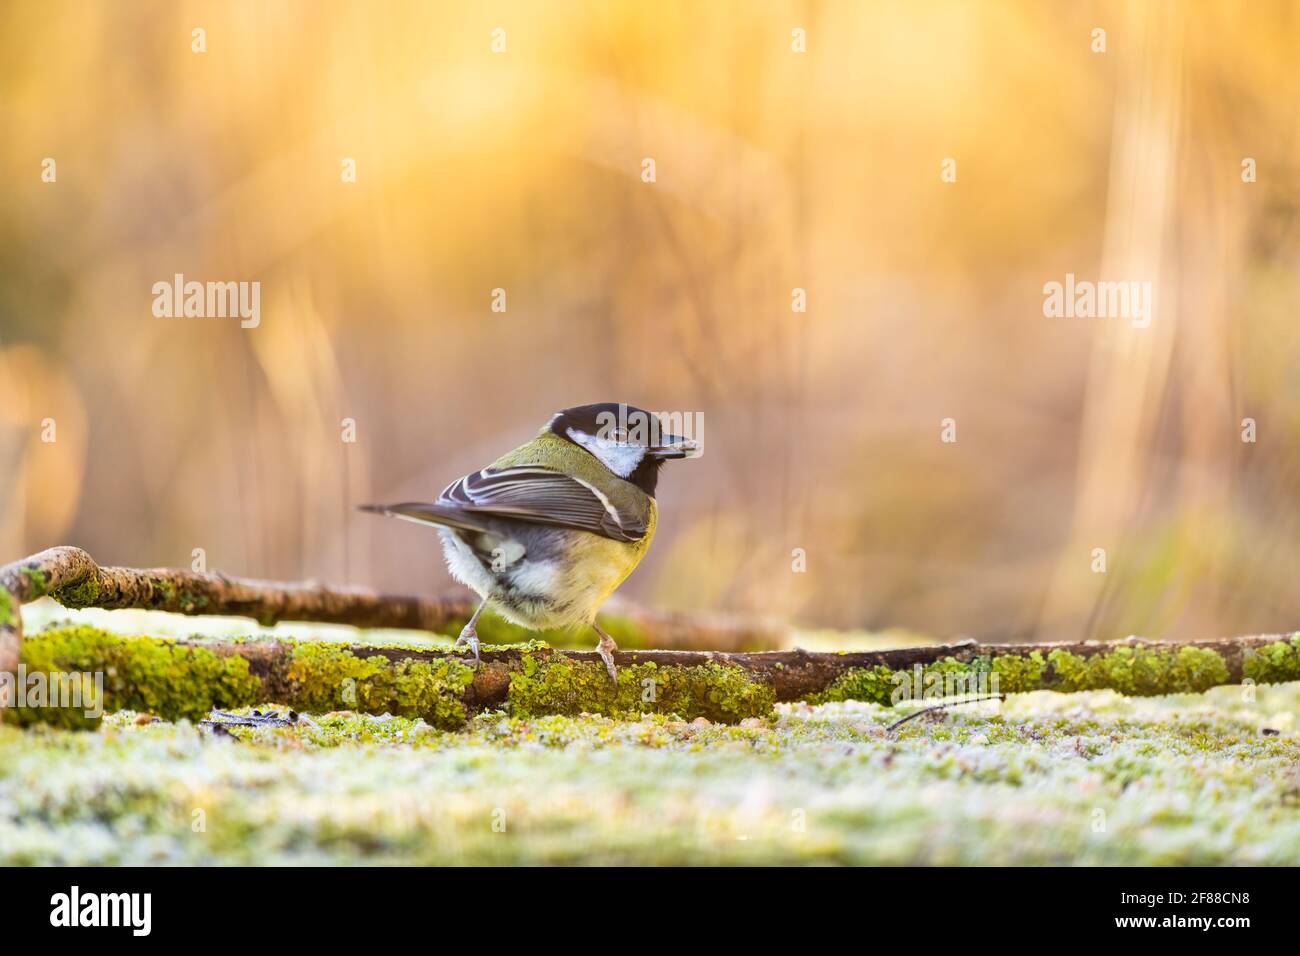 Portrait of Common Great Tit sitting amongst moss covered fallen branches, frost on the ground & the warm early morning sunrise backlighting the bird Stock Photo